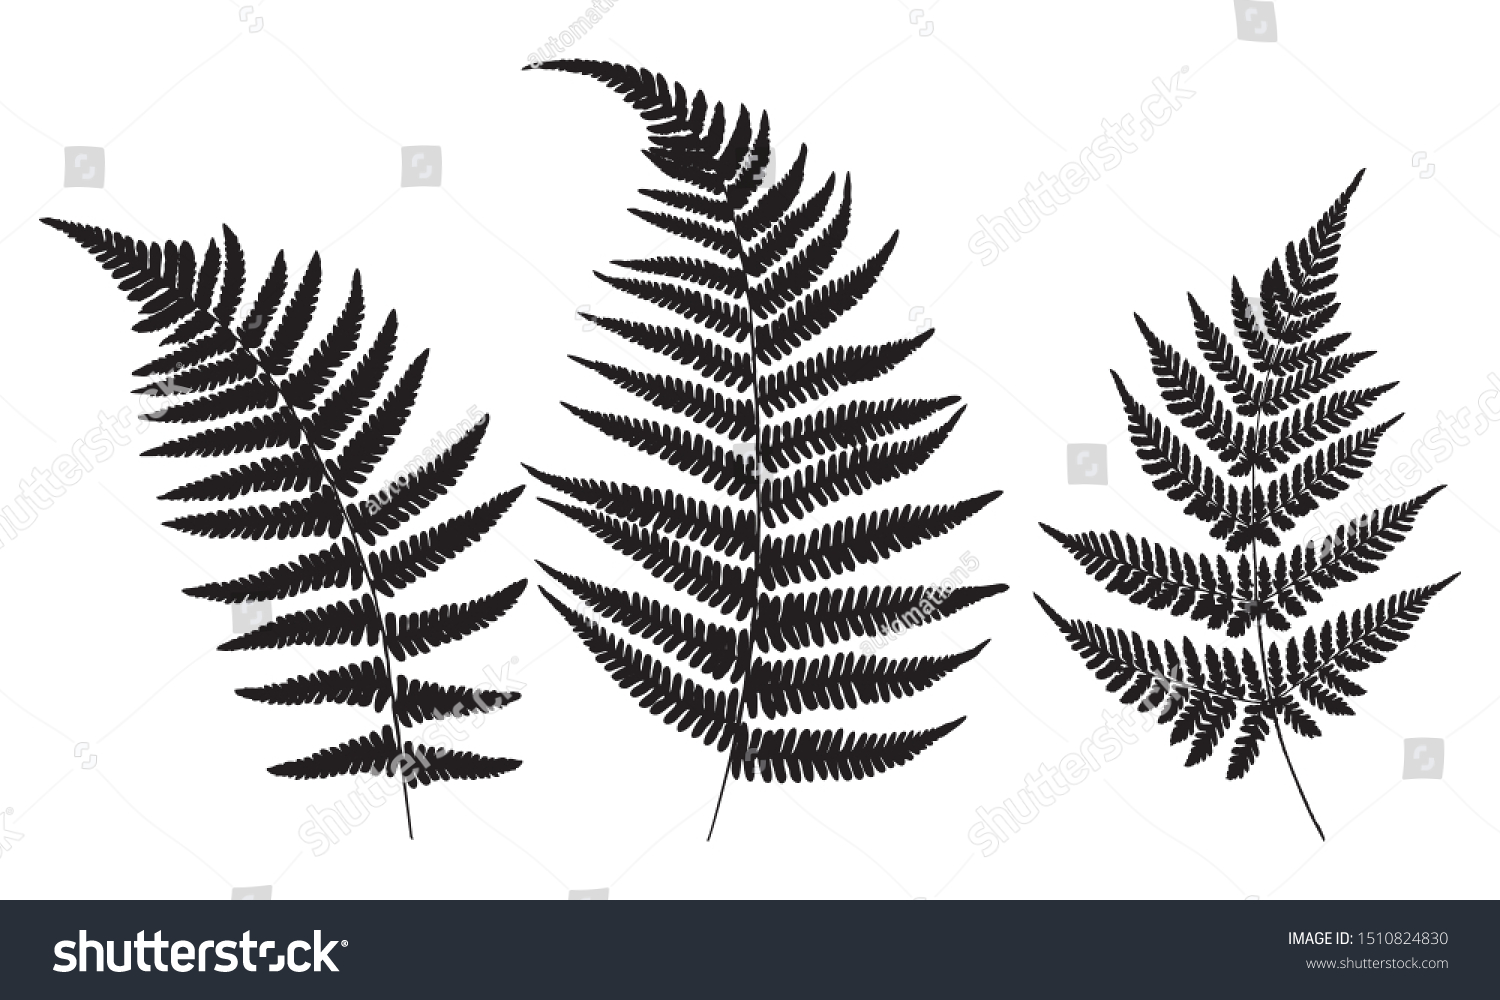 Three leaves of fern. Black isolated prints of fern leaves on the white background. Vector illustration.  #1510824830